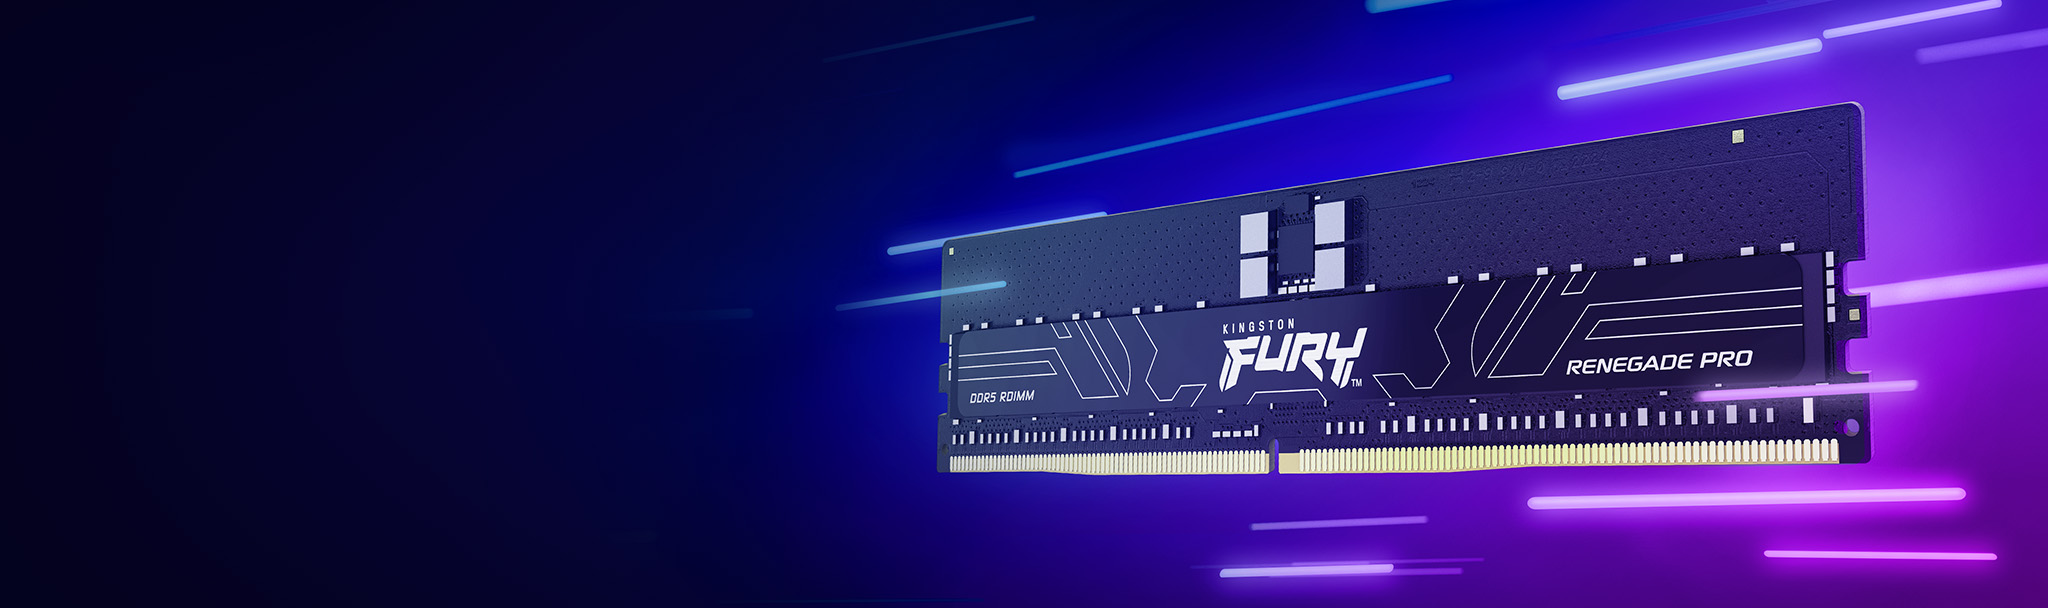 A Kingston FURY Renegade Pro DDR5 RDIMM moving fast on a dynamic background.